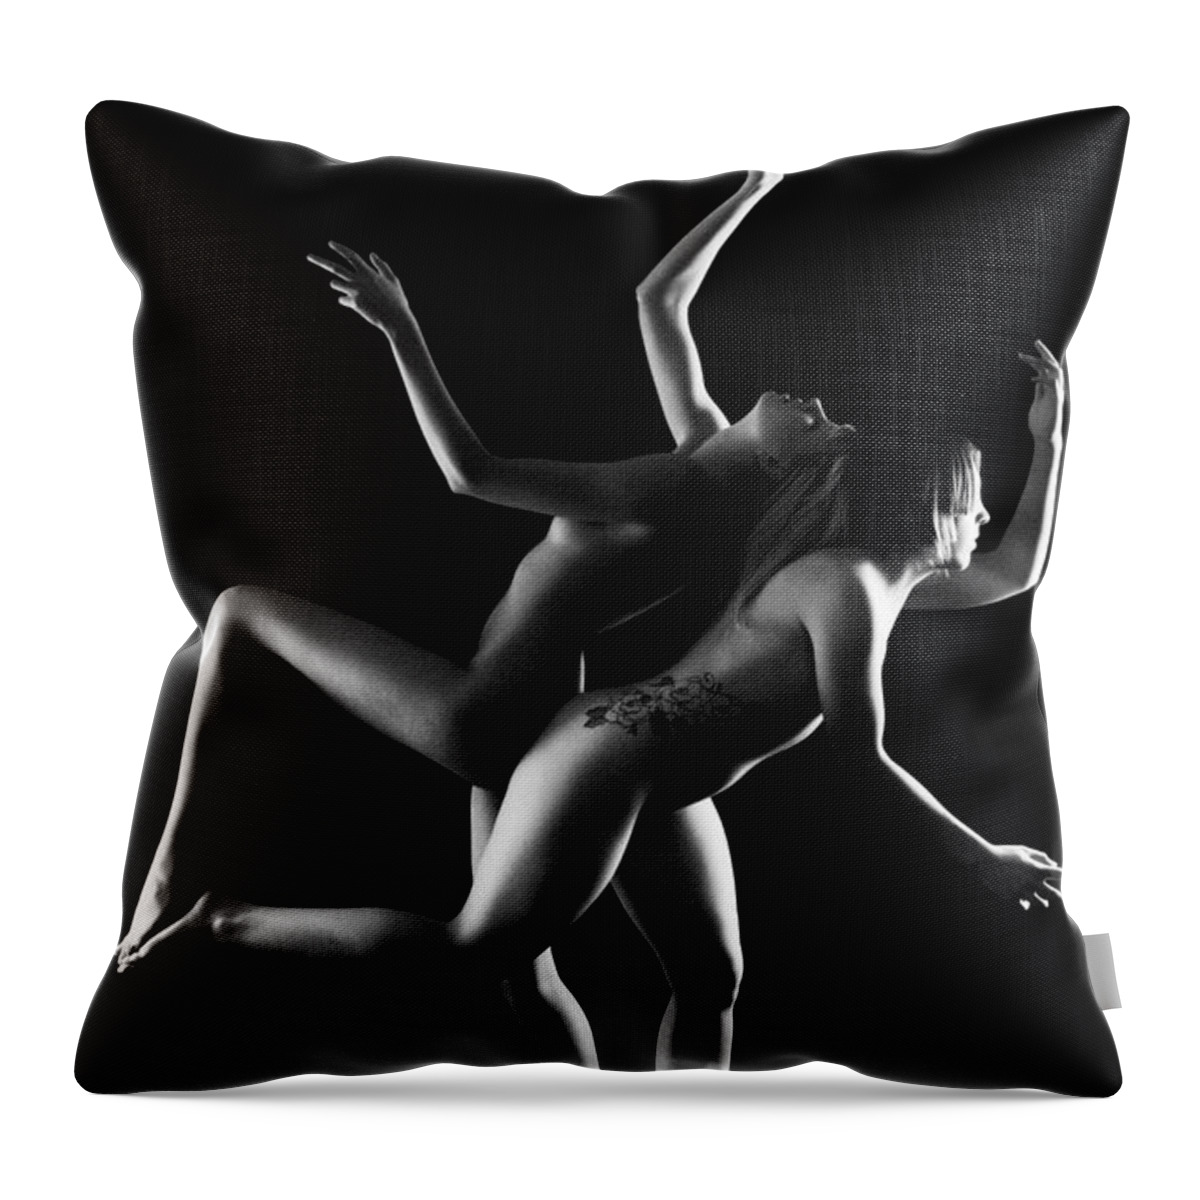 Artistic Throw Pillow featuring the photograph Static Energy by Robert WK Clark